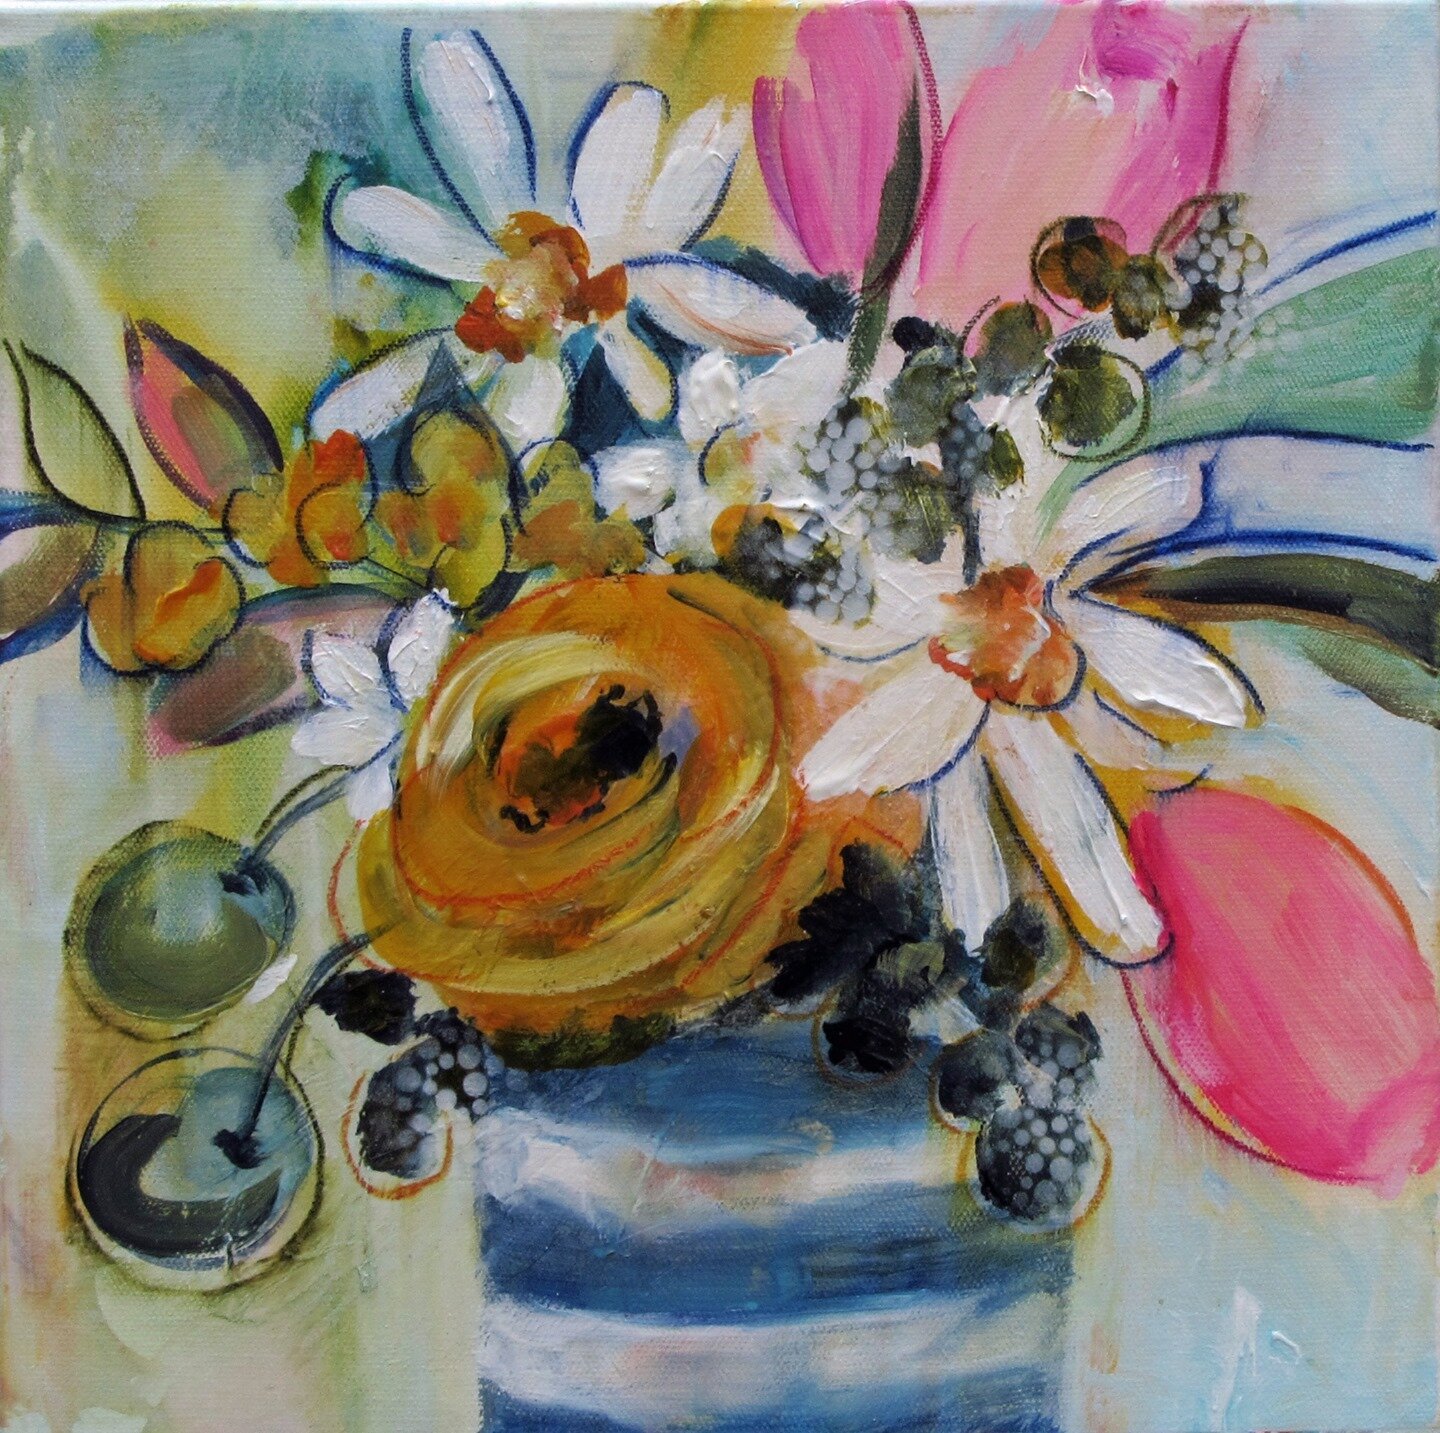 Stripe pot, bright colors, what could bring more spring to your home? 12&quot;x12&quot; acrylic mixed media, #cindyauneart www.cindyaune.com #thecarongallery